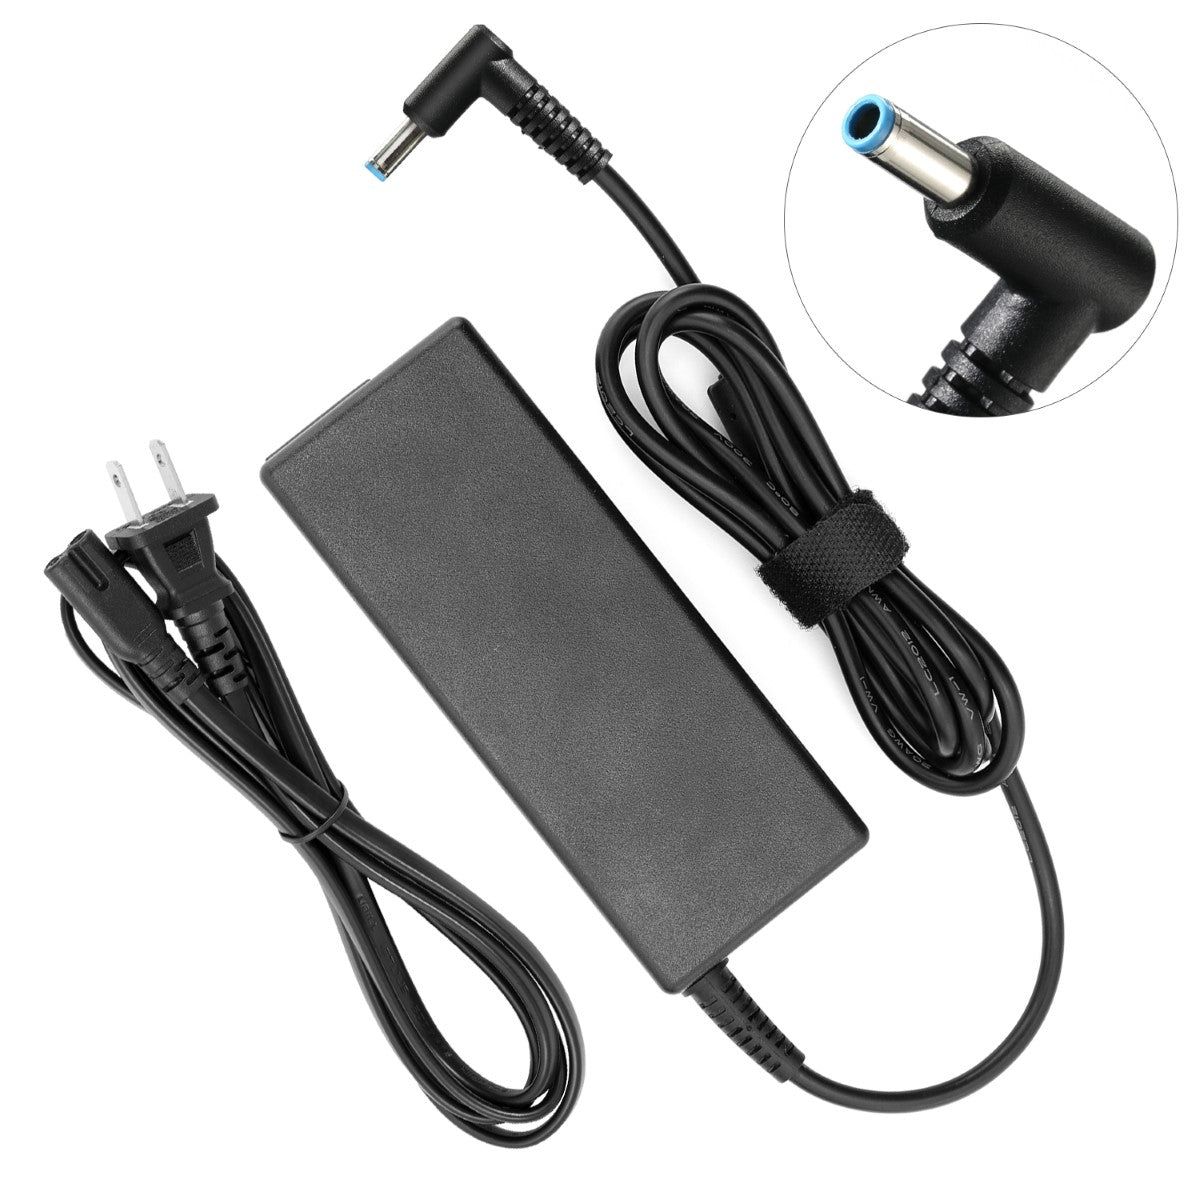 AC Adapter Charger for HP Envy Touchsmart 17-j092nr Notebook.